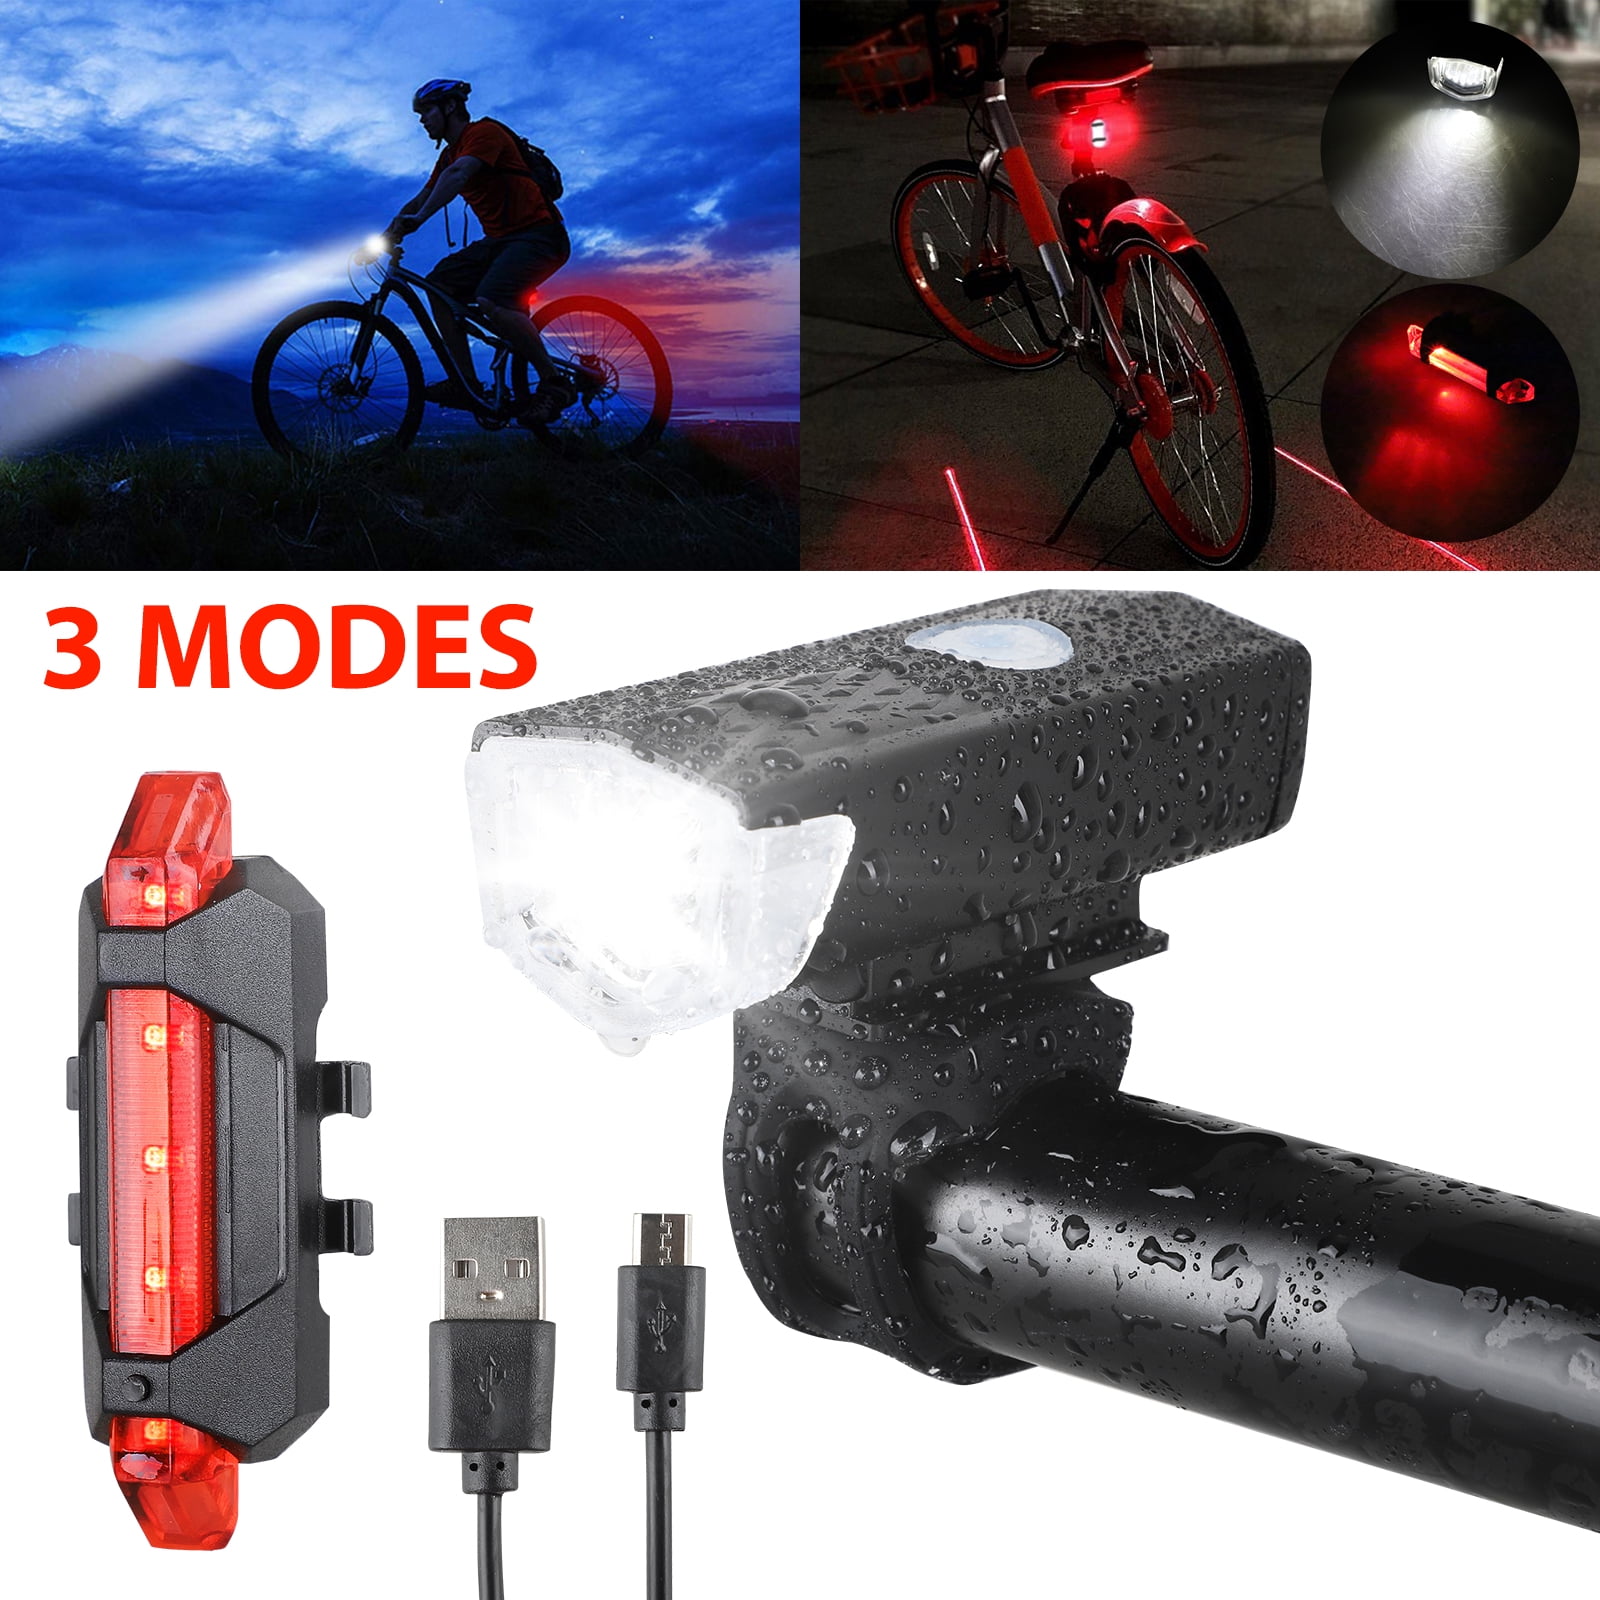 MTB Bike Waterproof Taillight USB Cable Night Riding Cycling Lights Accessories 